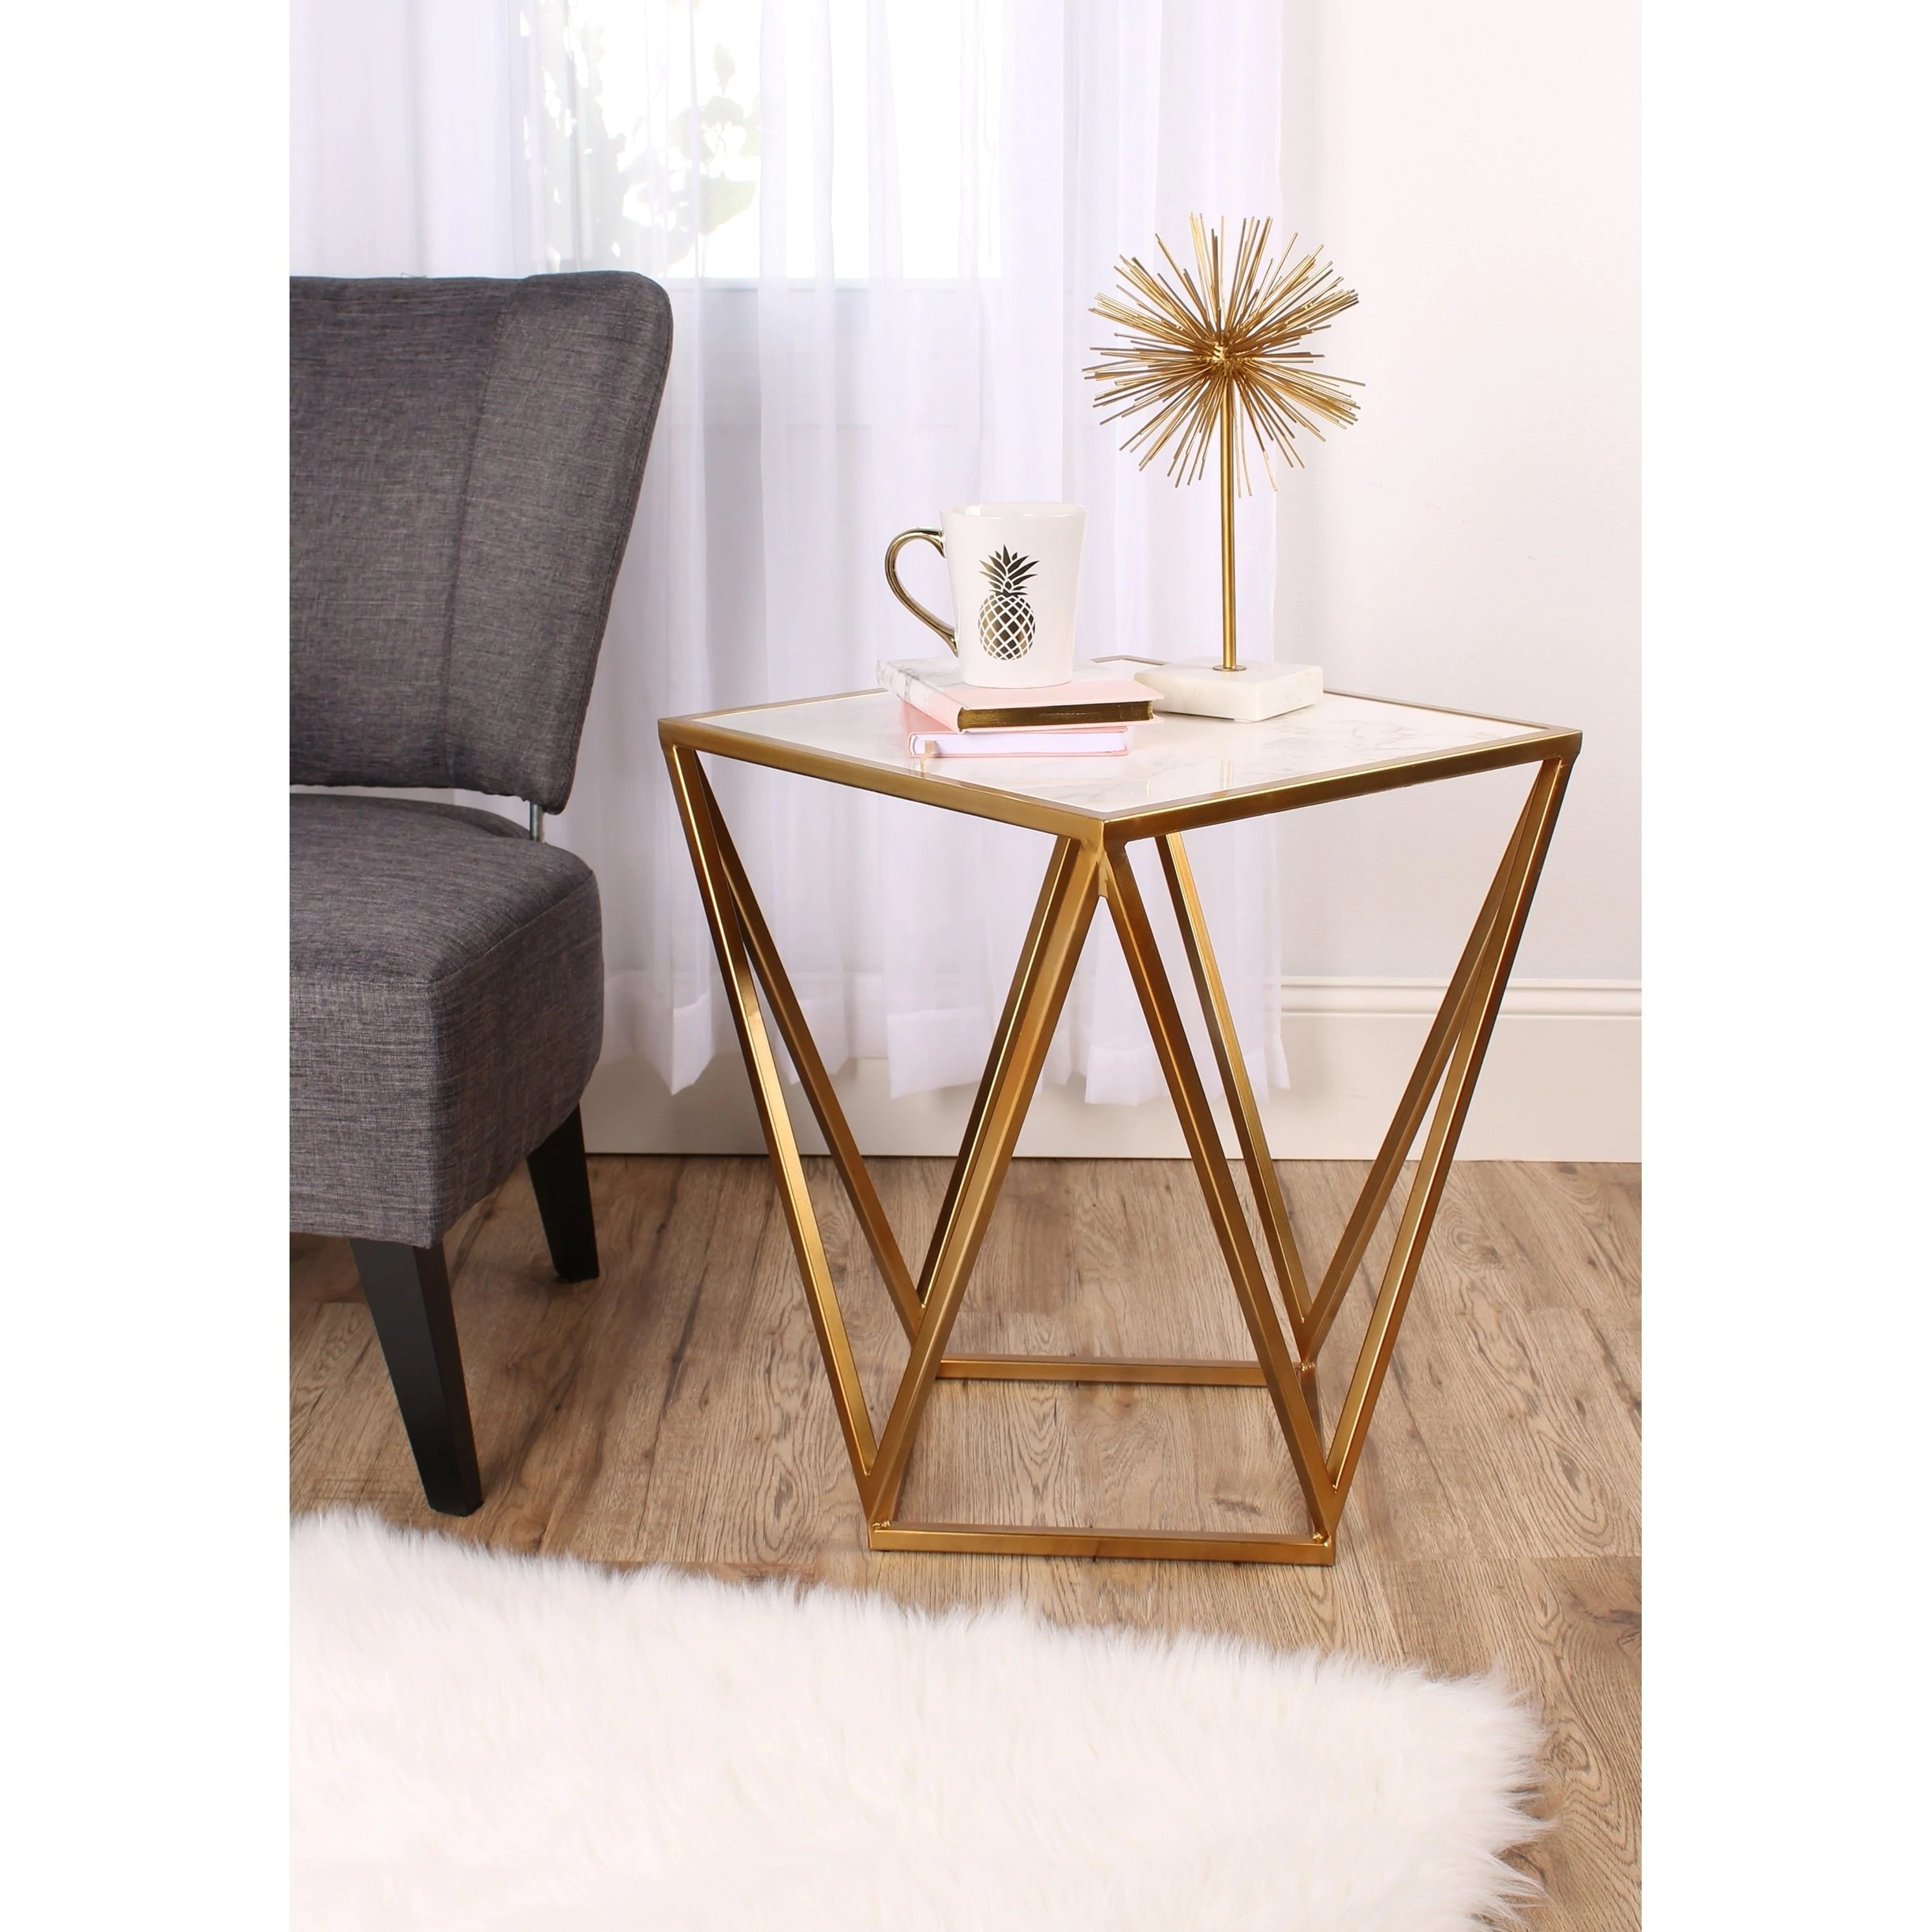 maia metal modern side accent table with marble top free shipping today home office desk ideas trestle pedestal dining night stand light ice cooler bar small furniture industrial